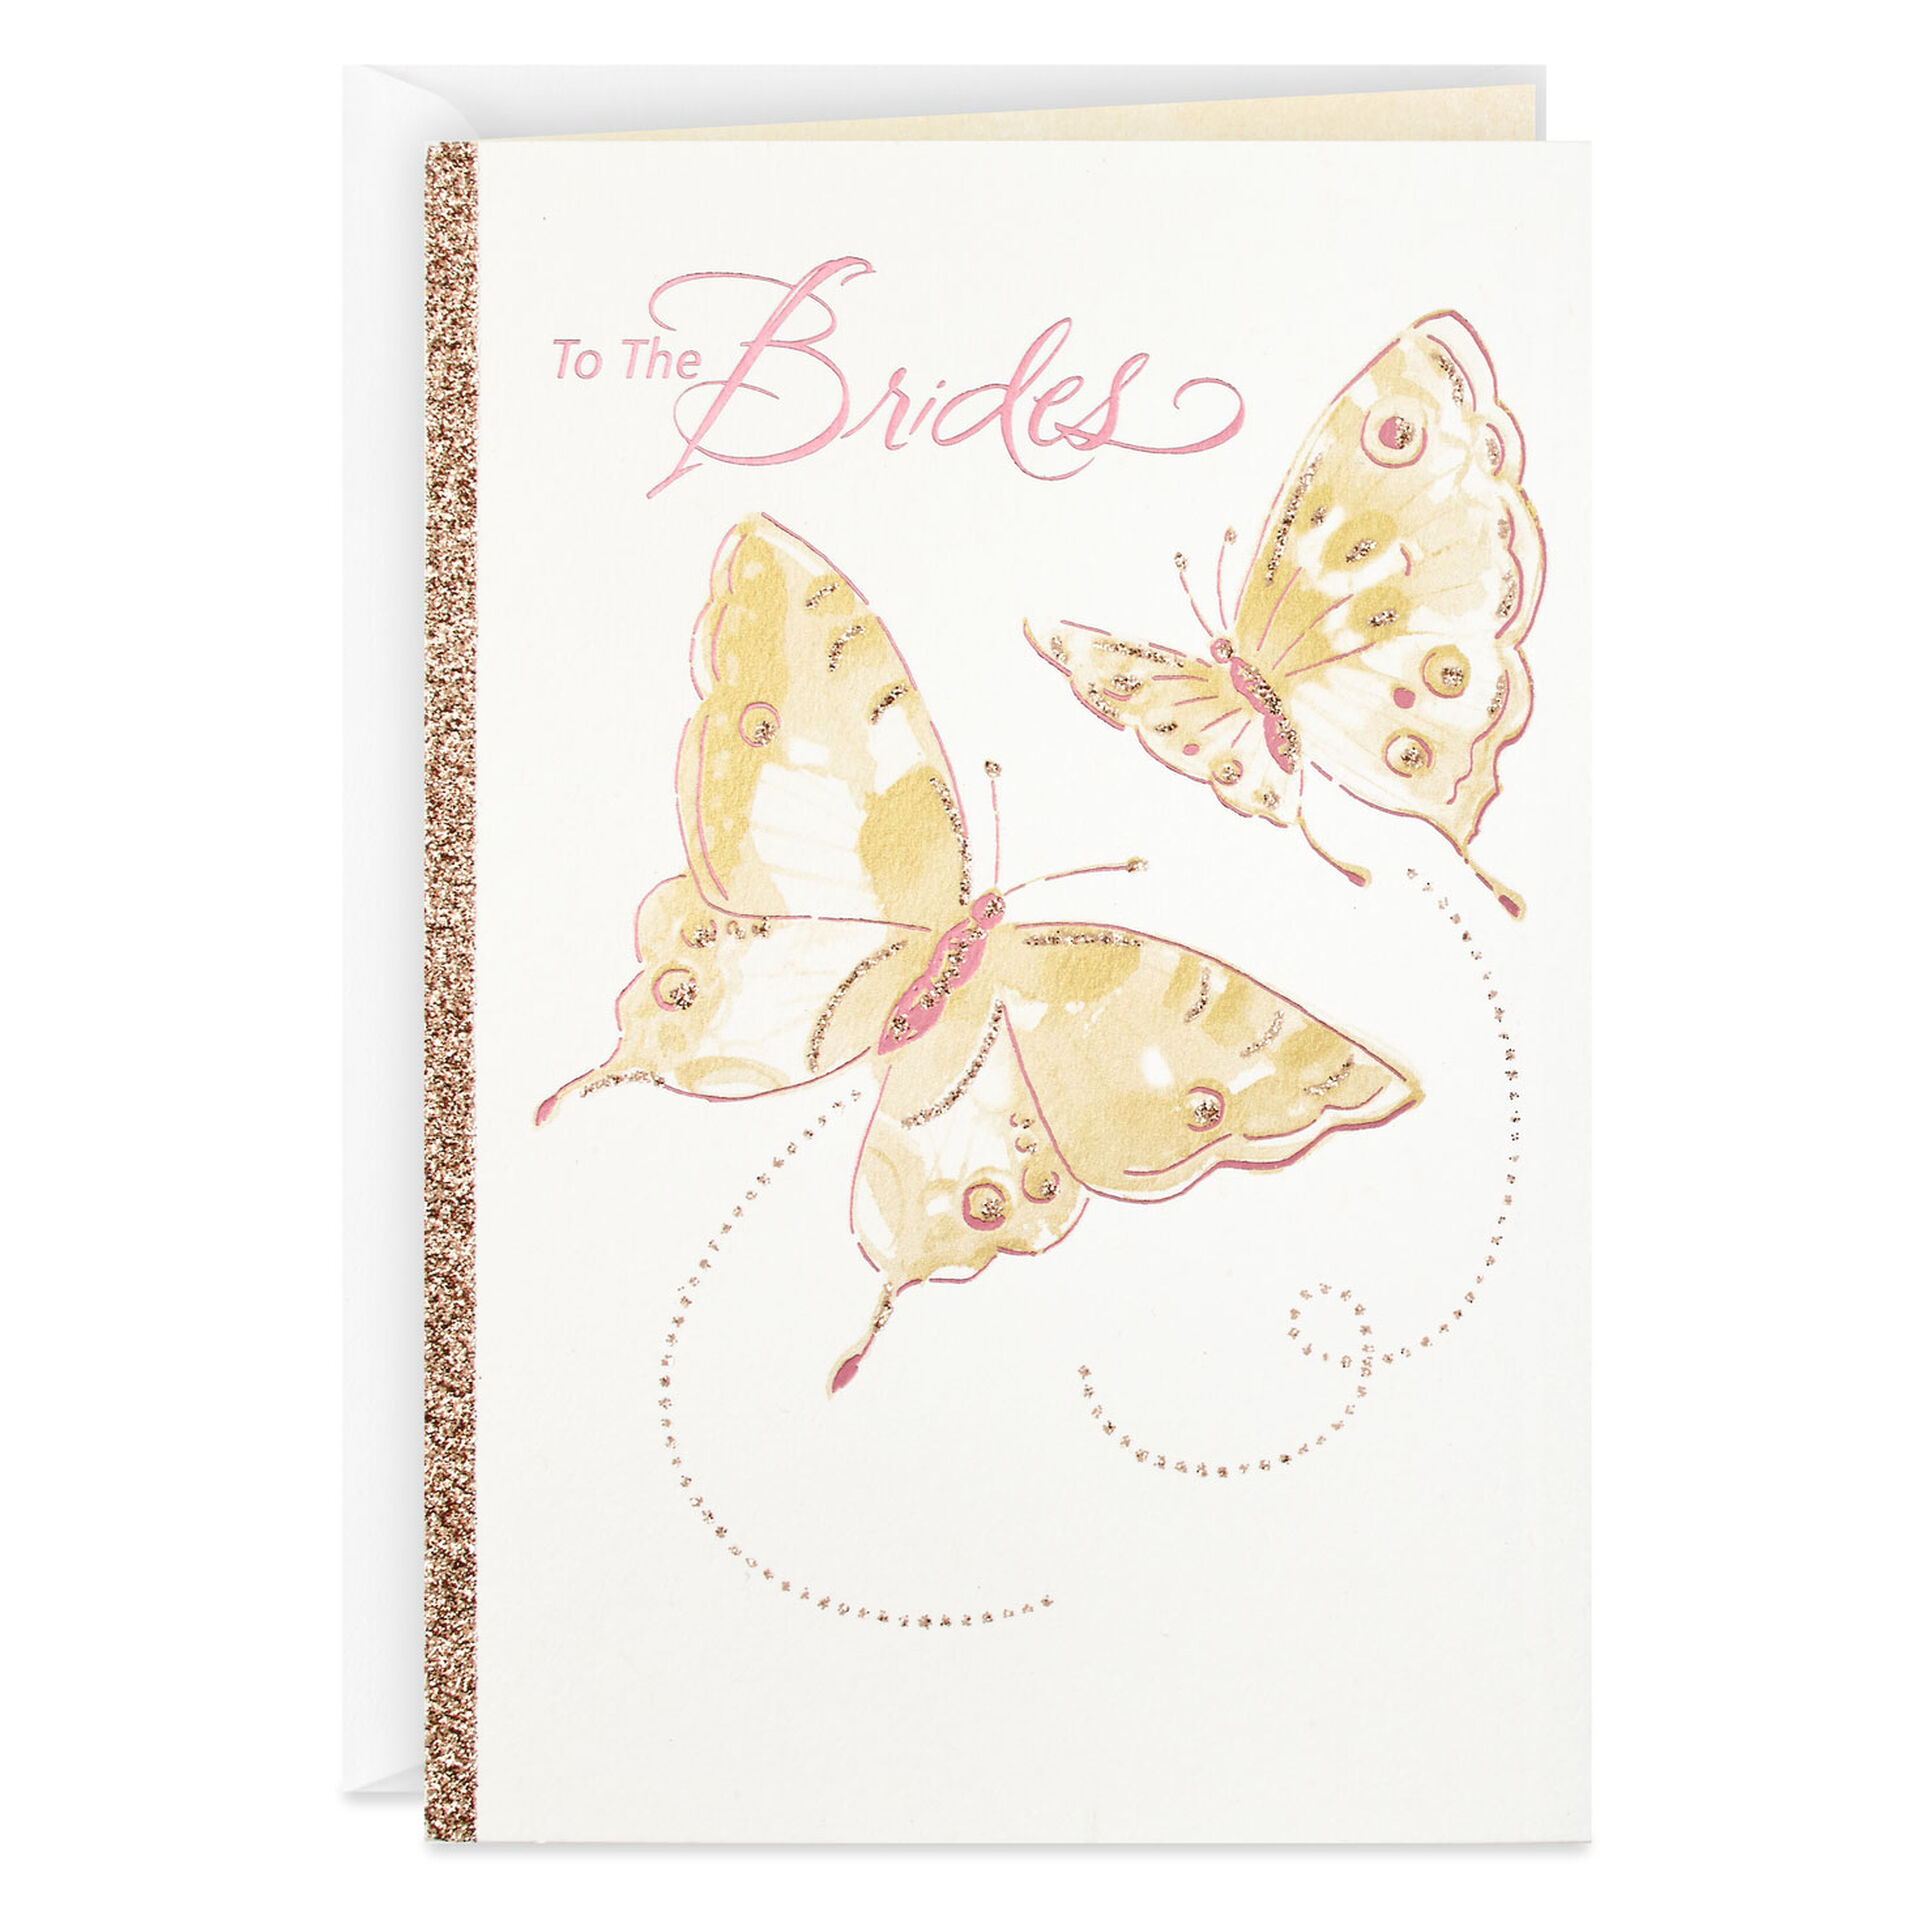 Glitter-Butterflies-Wedding-Card-for-Two-Brides_499W3291_01